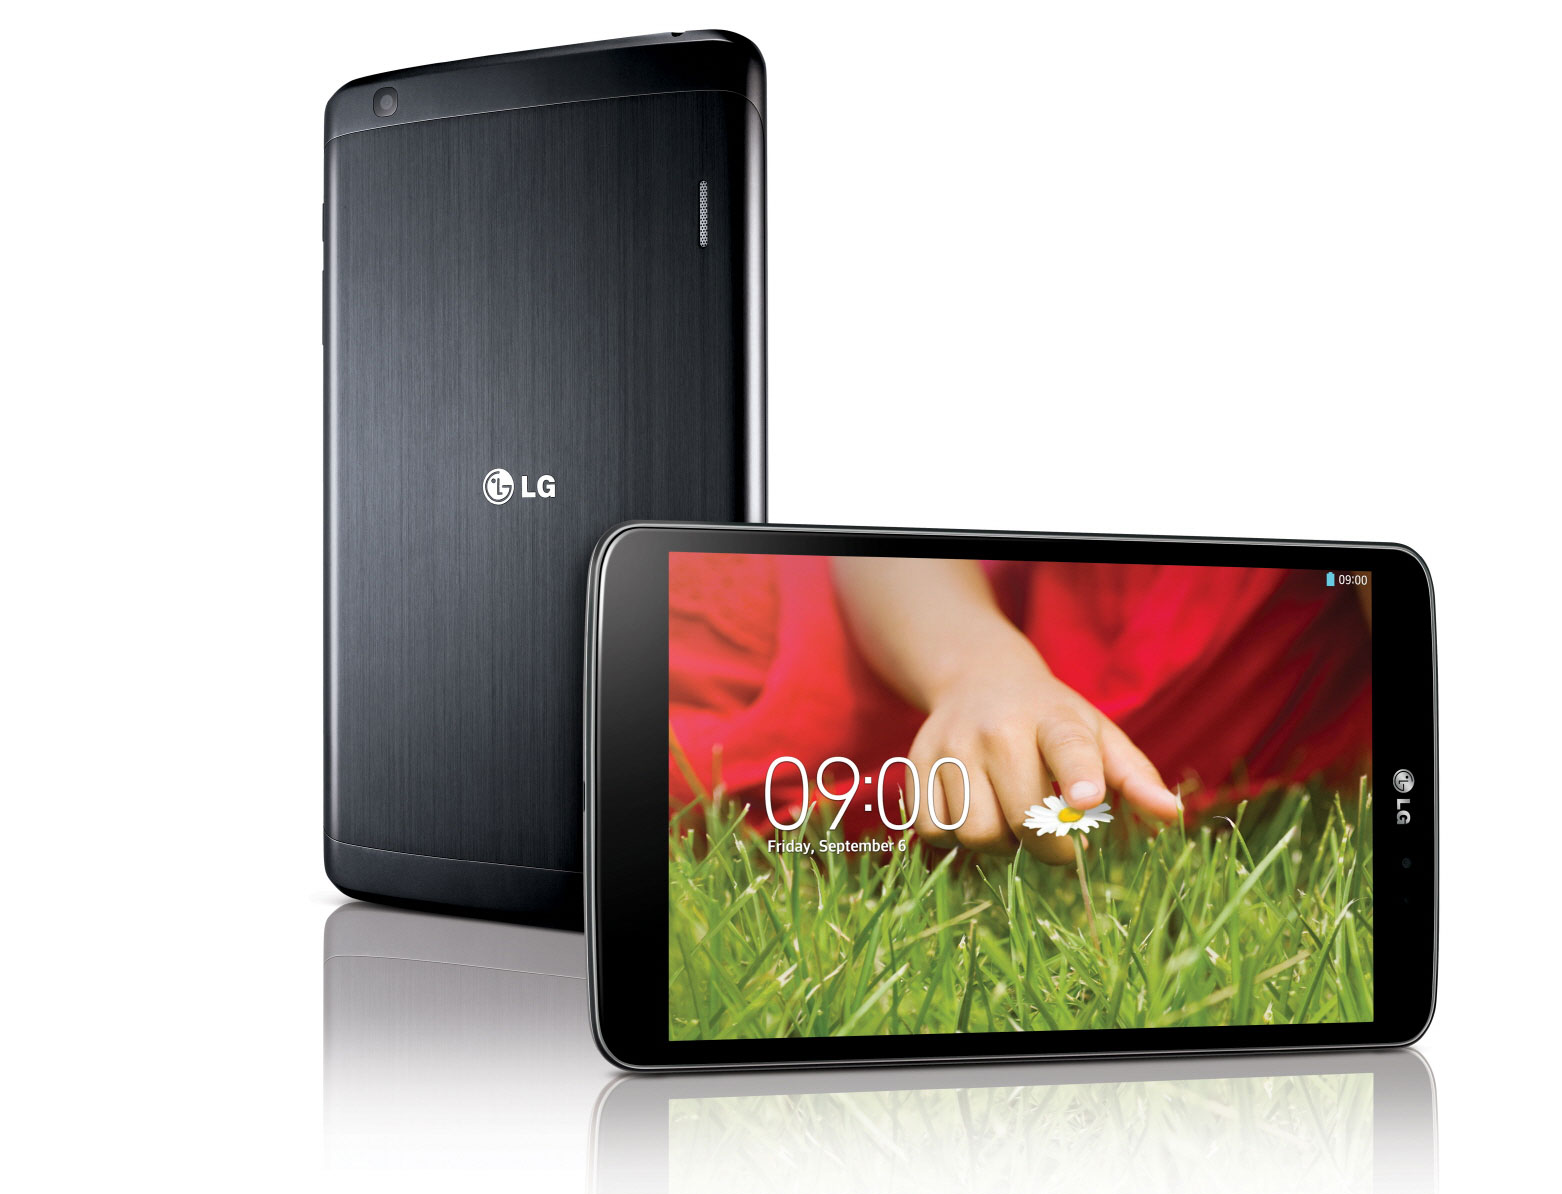 Smart Bro brings the premium tablet experience to PH with the LG G Pad 8.3